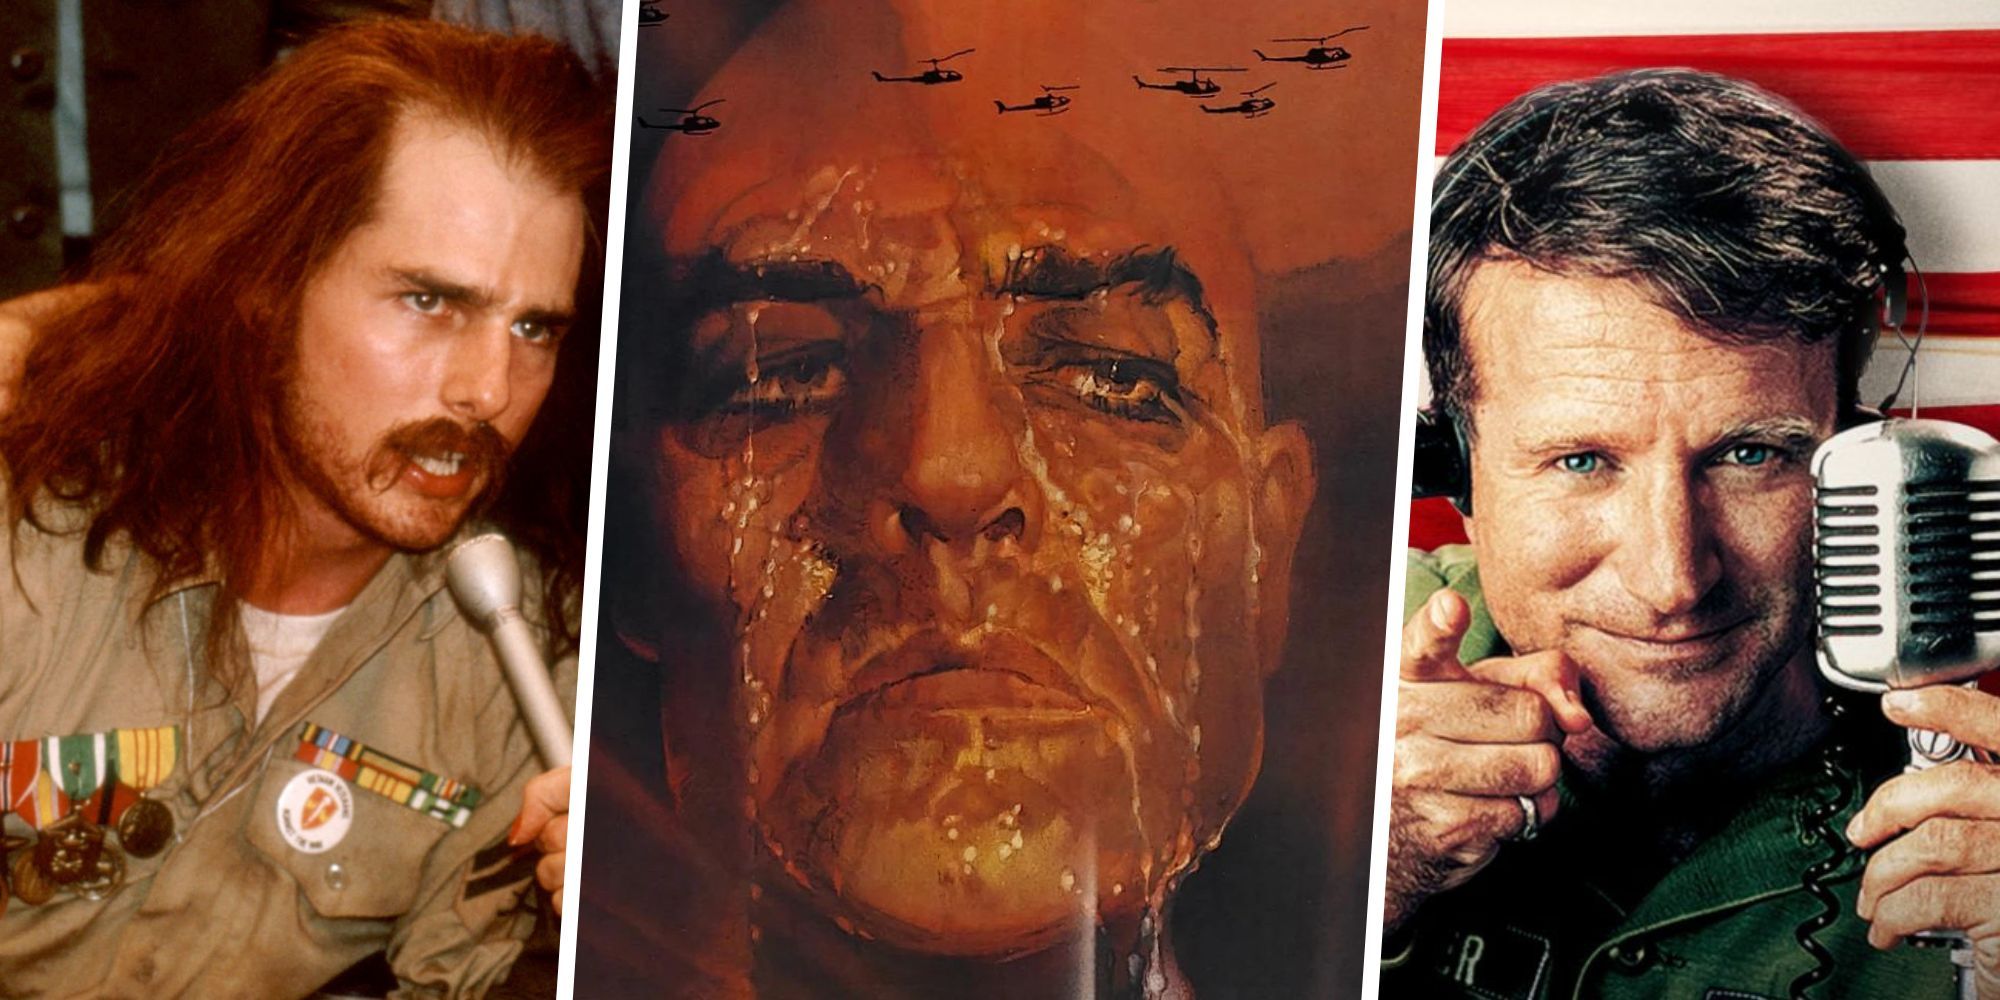 Collage with images from 'Born on the Fourth of July', 'Apocalypse Now', and 'Good Morning Vietnam'